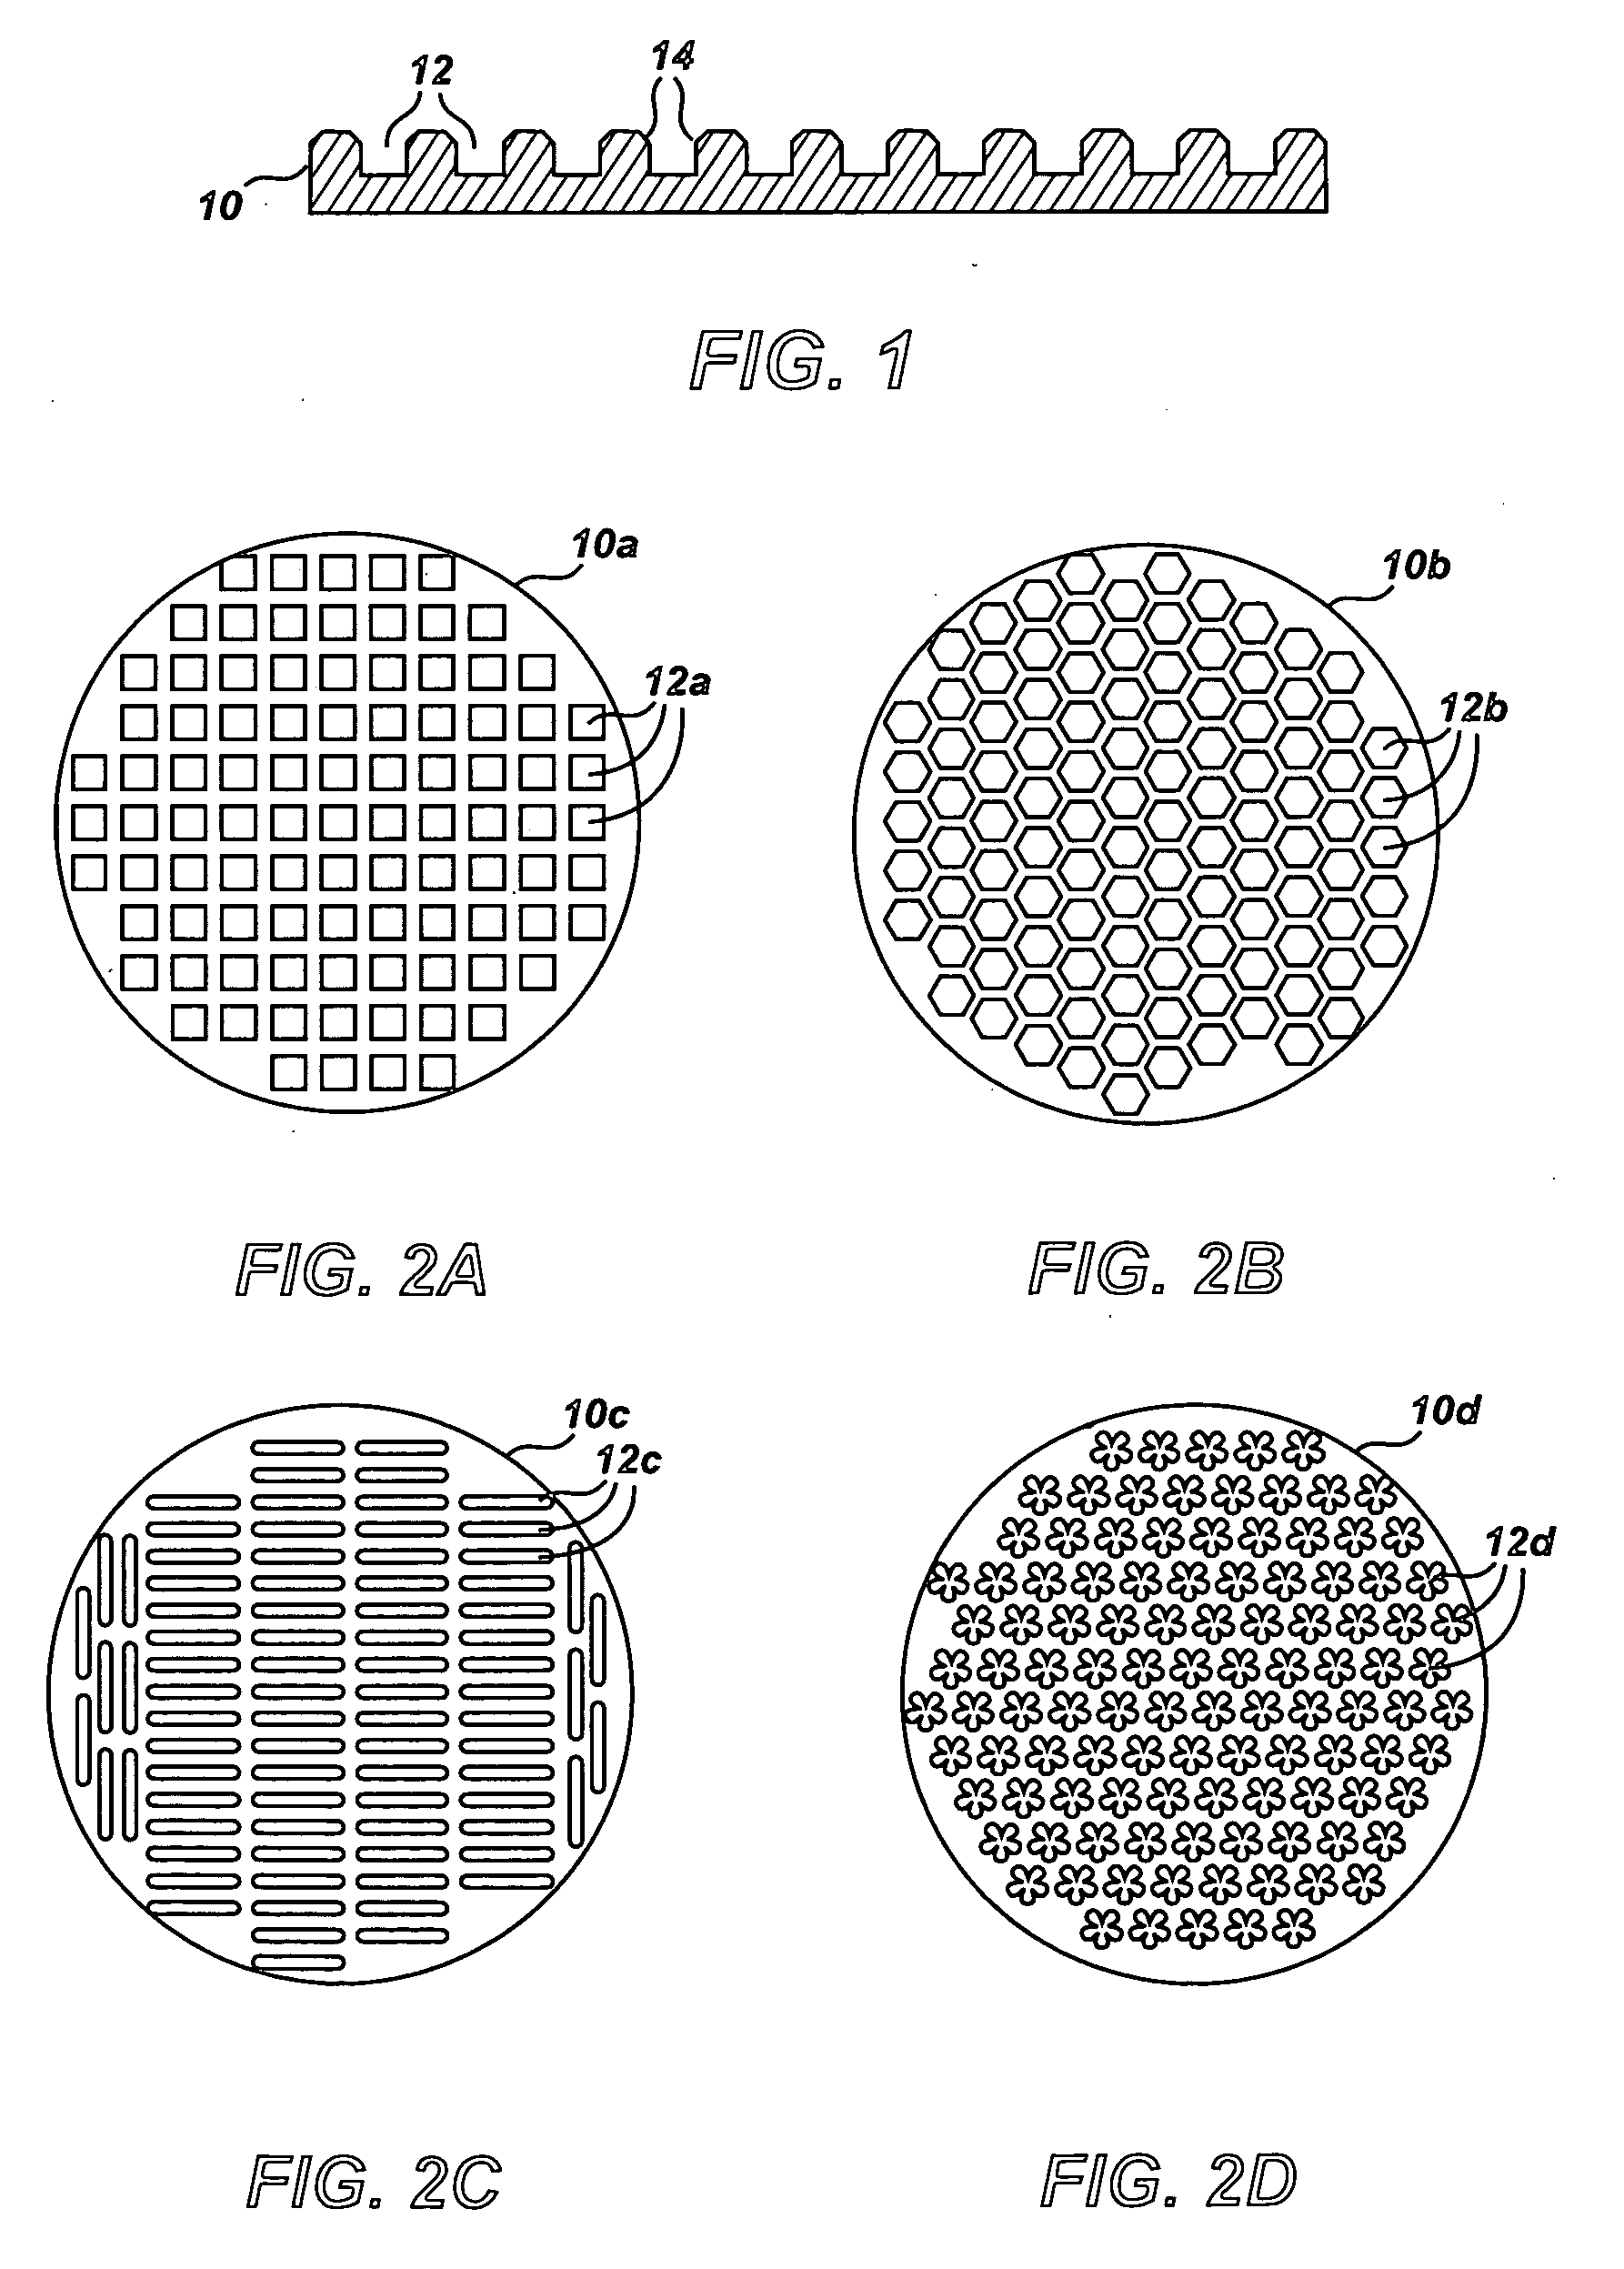 Shaped thermally stable polycrystalline material and associated methods of manufacture